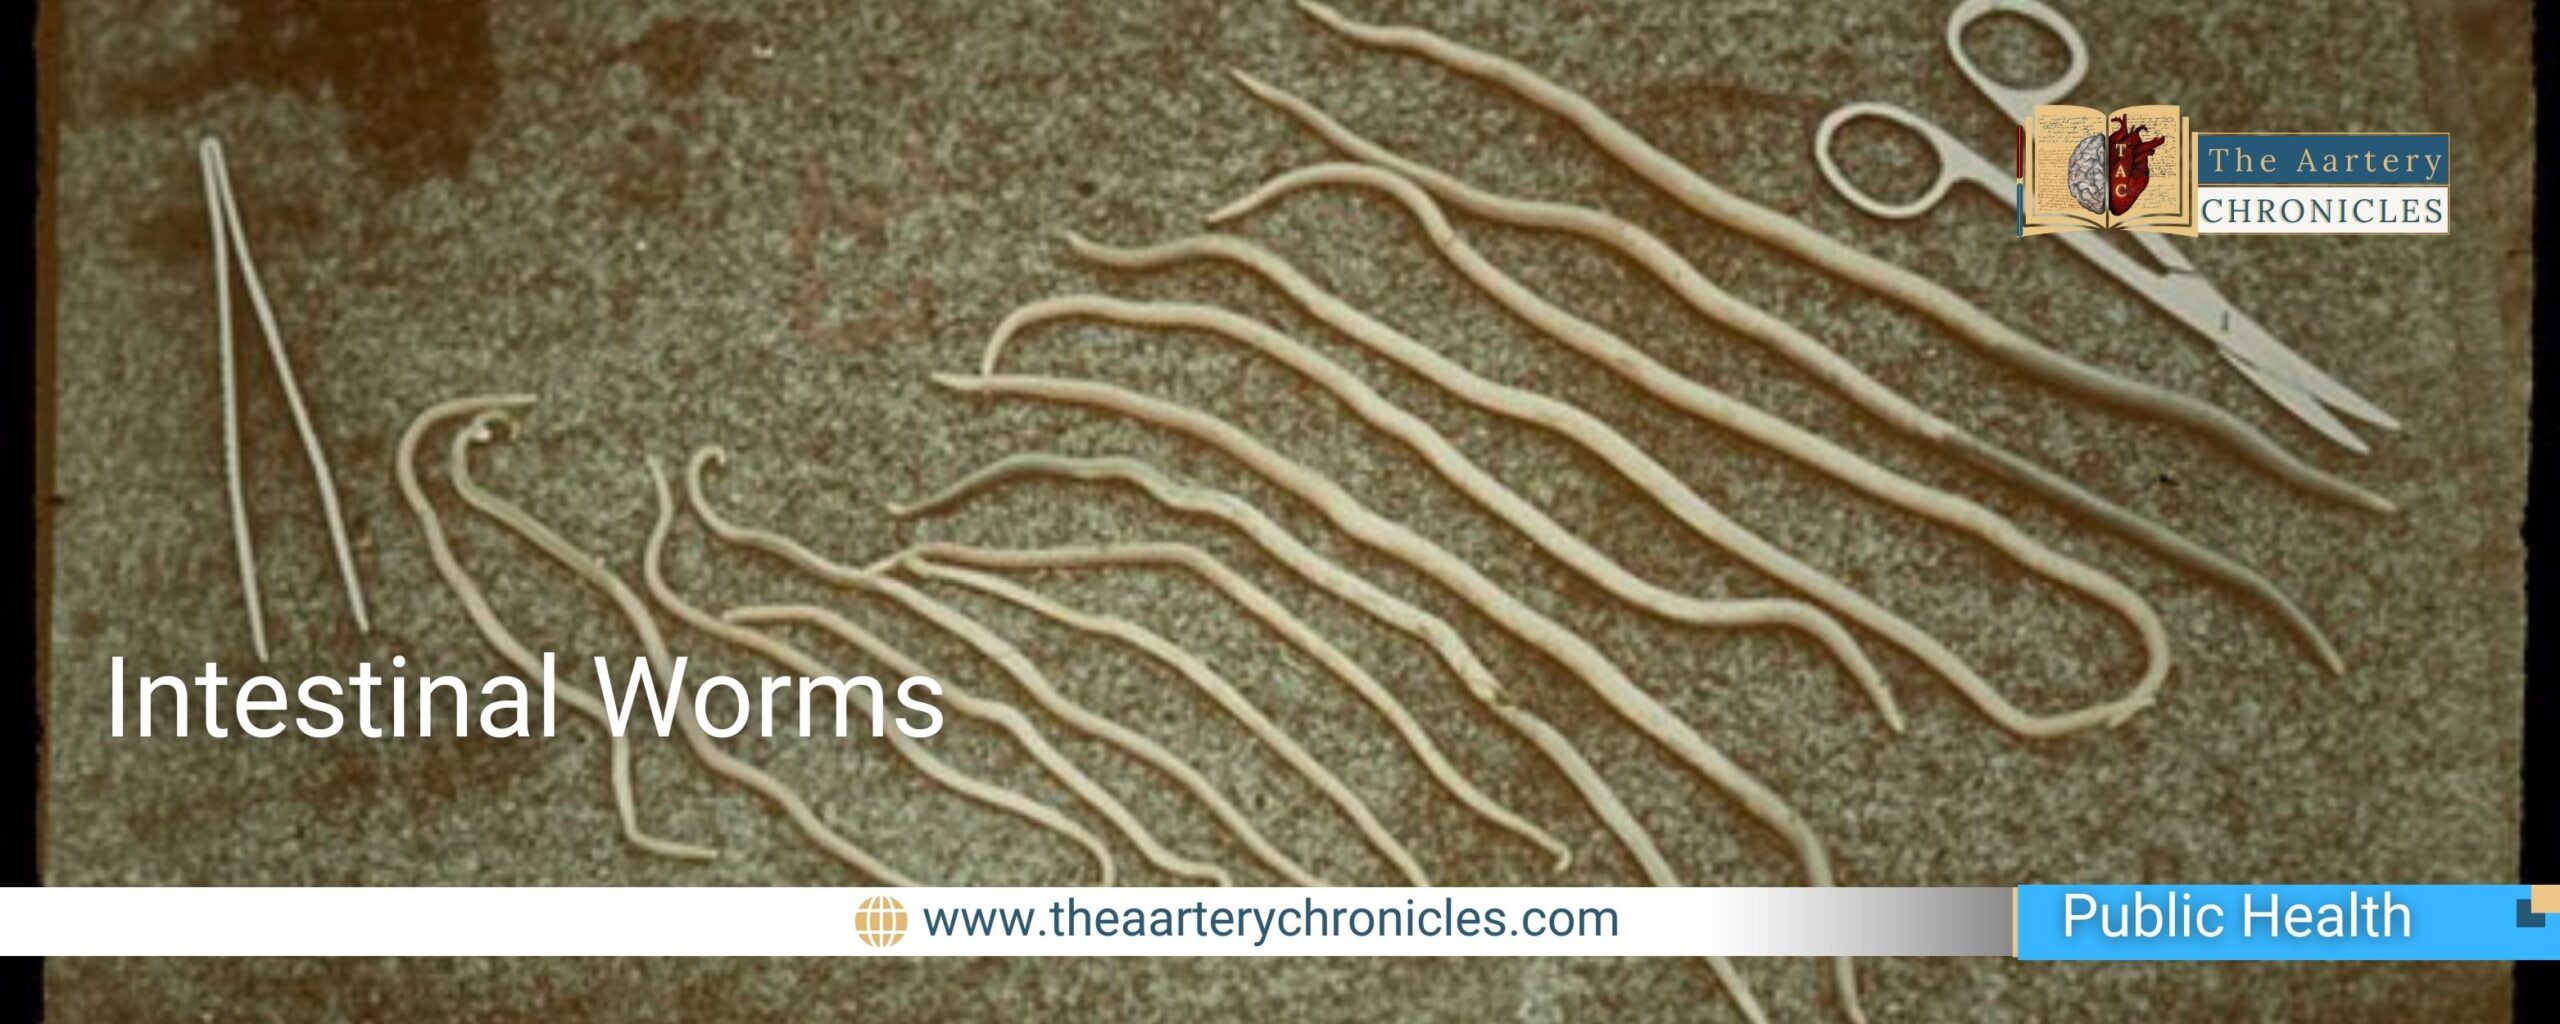 Intestinal-Worms-the-aaartery-chronicles-tac